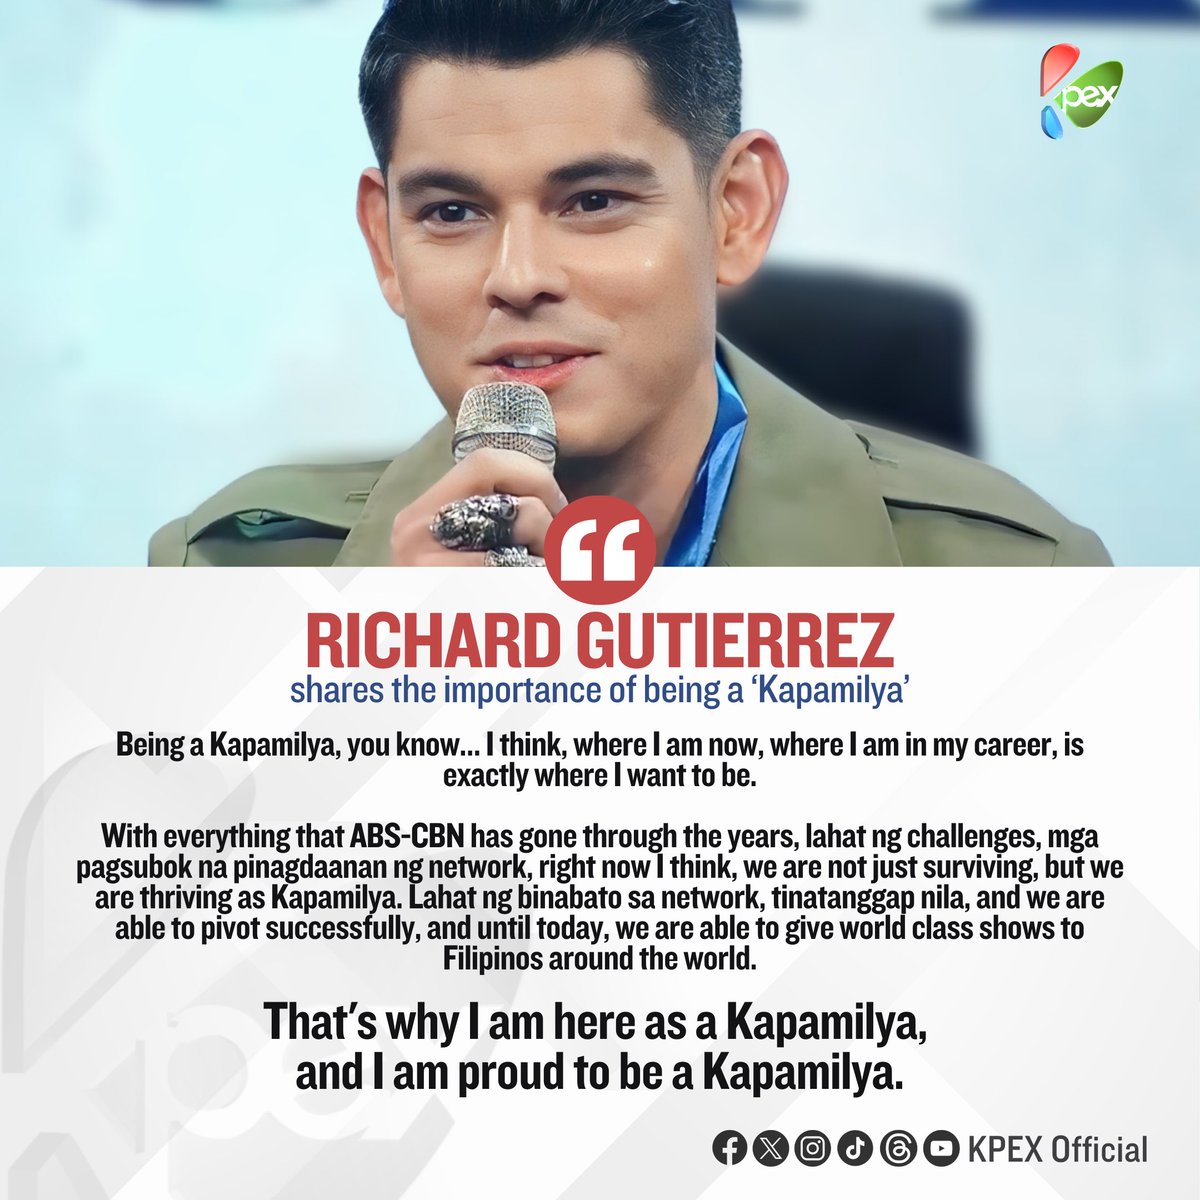 LOOK: Richard Gutierrez signs new contract with ABS-CBN; shares the importance of being a Kapamilya. 

❤️💚💙
@teamgutierrez